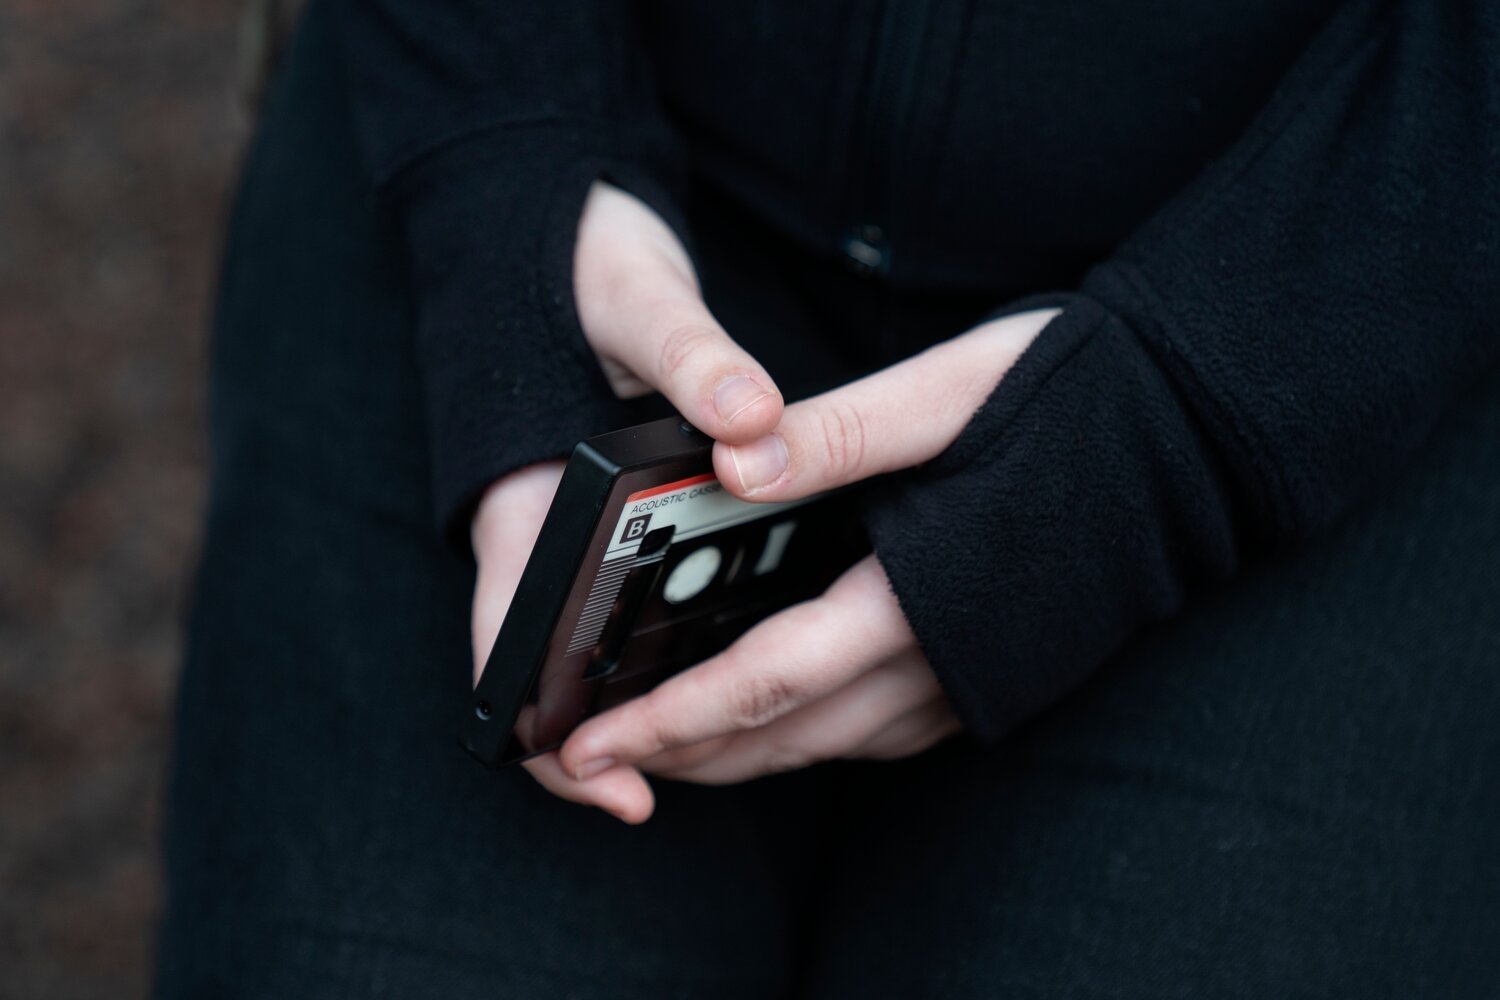 A teenager holds her phone as she sits for a portrait near her home in Illinois, on Friday, March 24, 2023. The U.S. Surgeon General is warning there is not enough evidence to show that social media is safe for young people — and is calling on tech companies, parents and caregivers to take "immediate action to protect kids now."